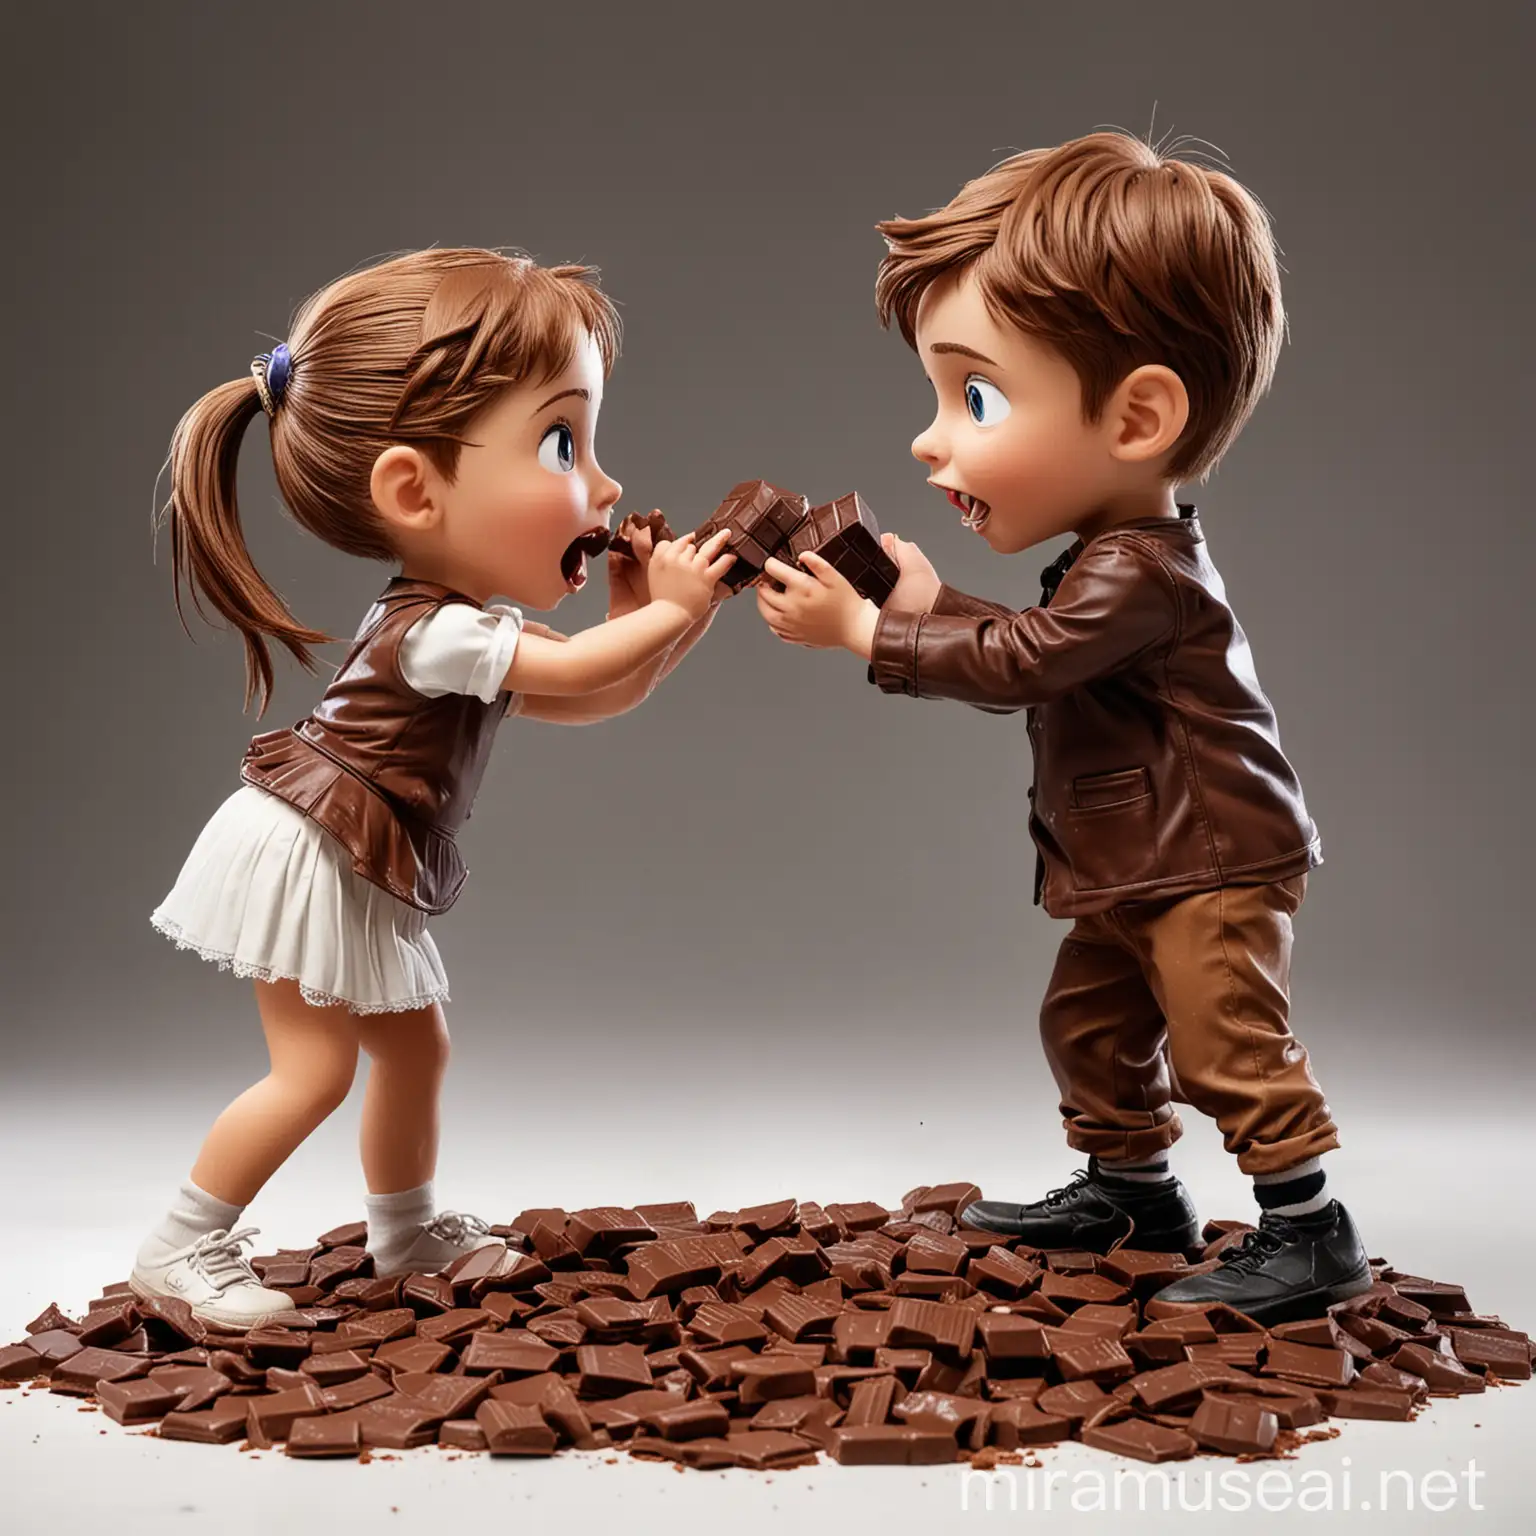 Sibling Rivalry Boy and Girl Playfully Compete for Chocolate